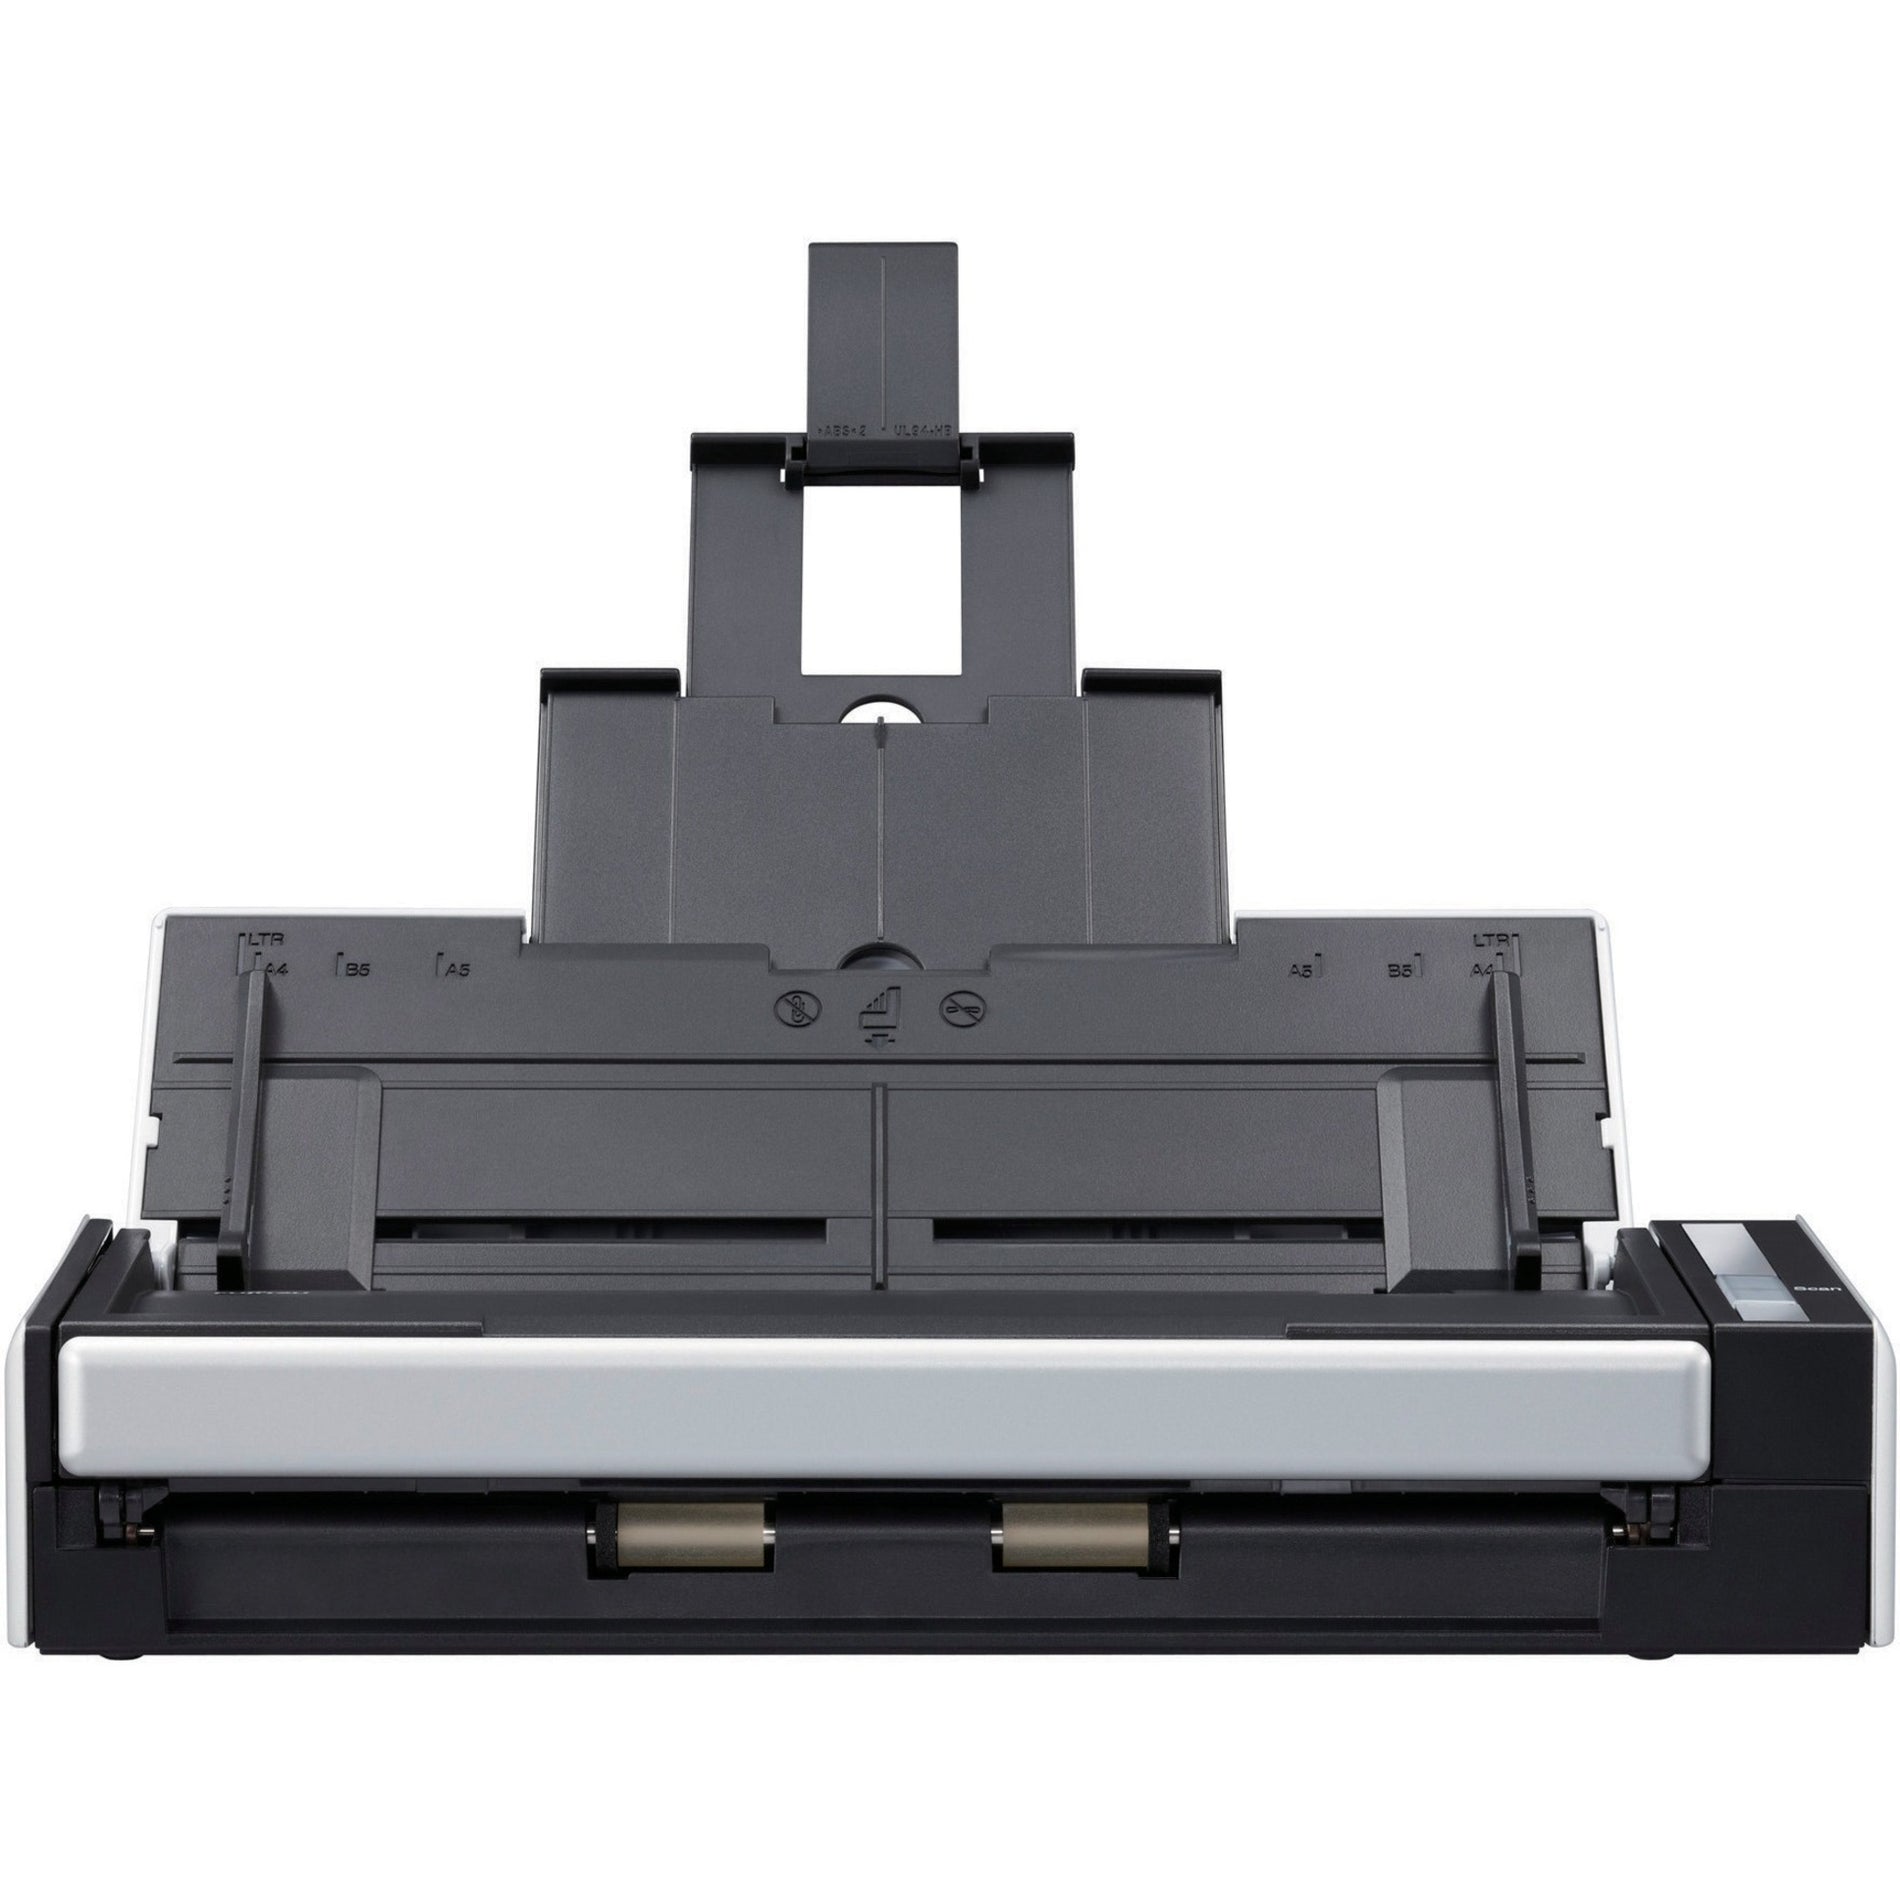 Fujitsu PA03643-B005 ScanSnap S1300i Portable Color Duplex Scanner for PC and Mac, Compact and Efficient Scanning Solution